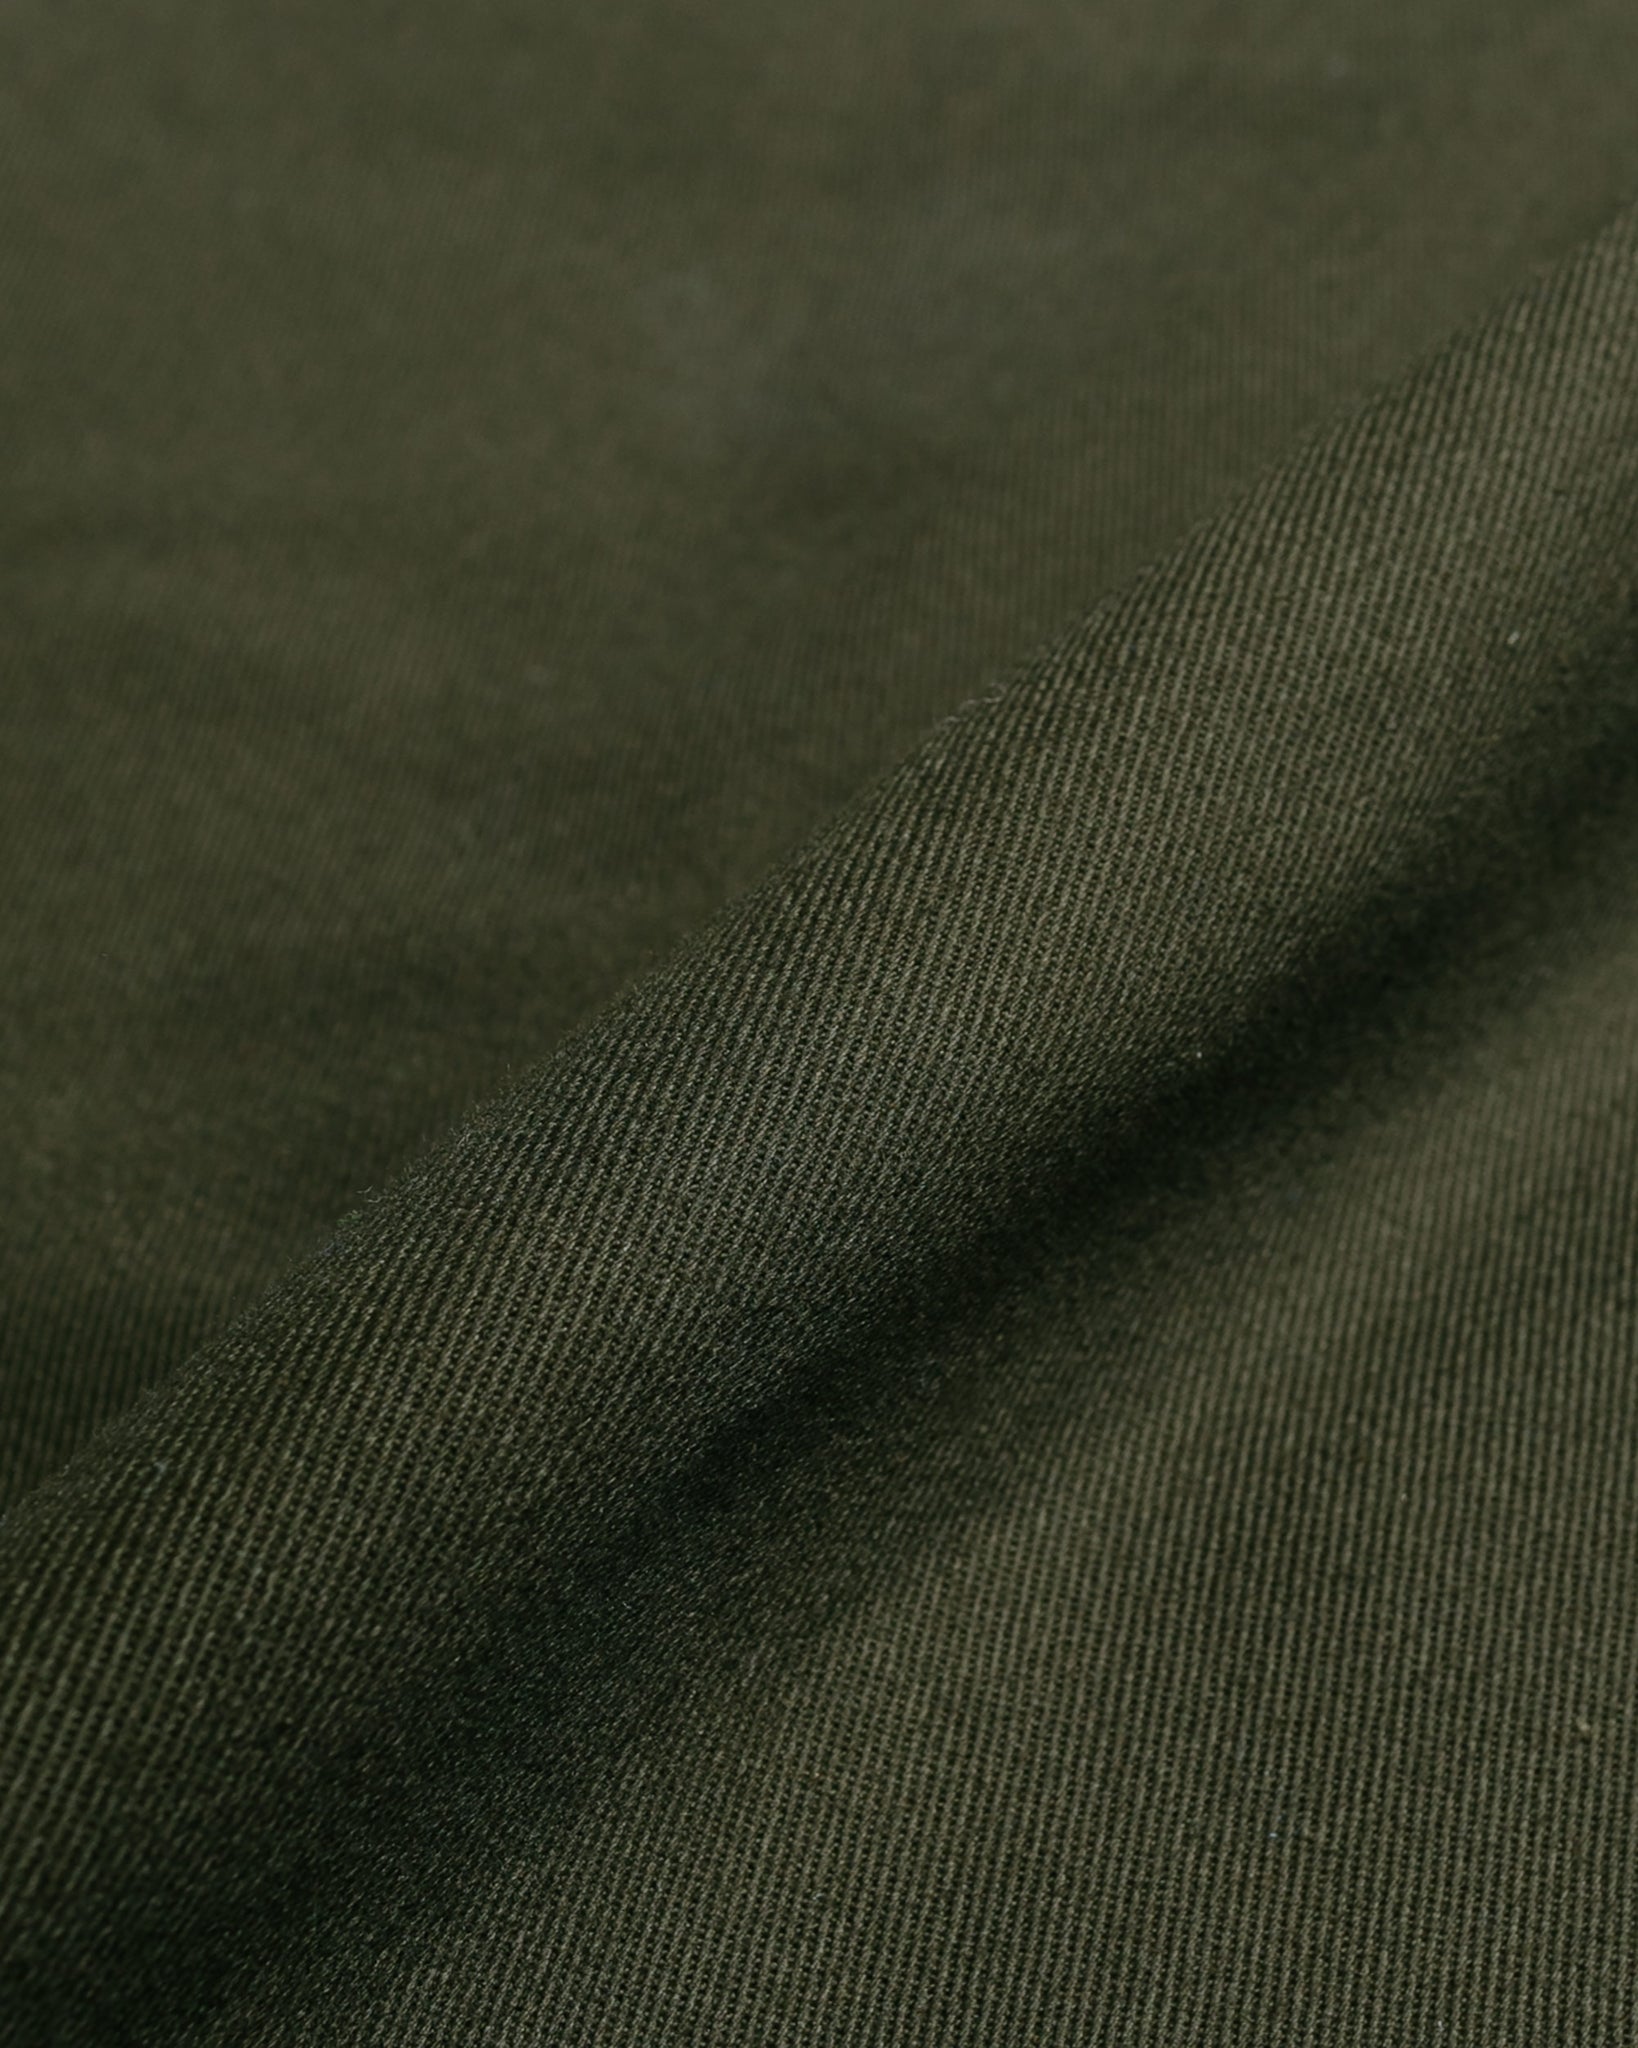 Randy's Garments Gusseted Work Pants Super Twill Dark Olive fabric